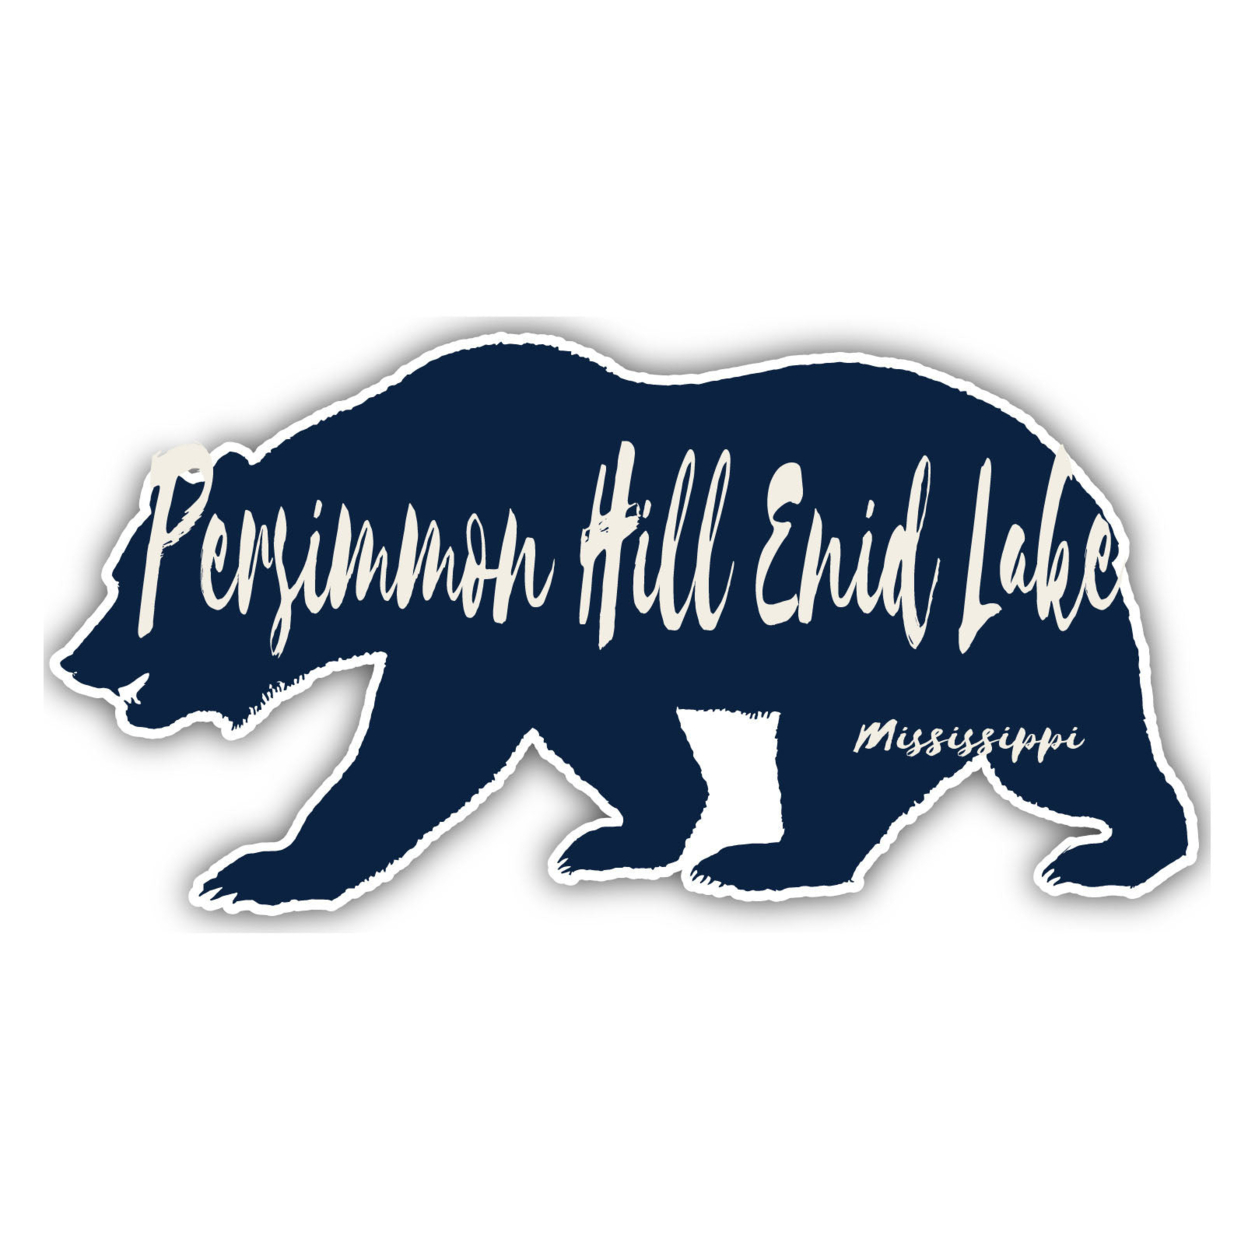 Persimmon Hill Enid Lake Mississippi Souvenir Decorative Stickers (Choose Theme And Size) - Single Unit, 2-Inch, Bear